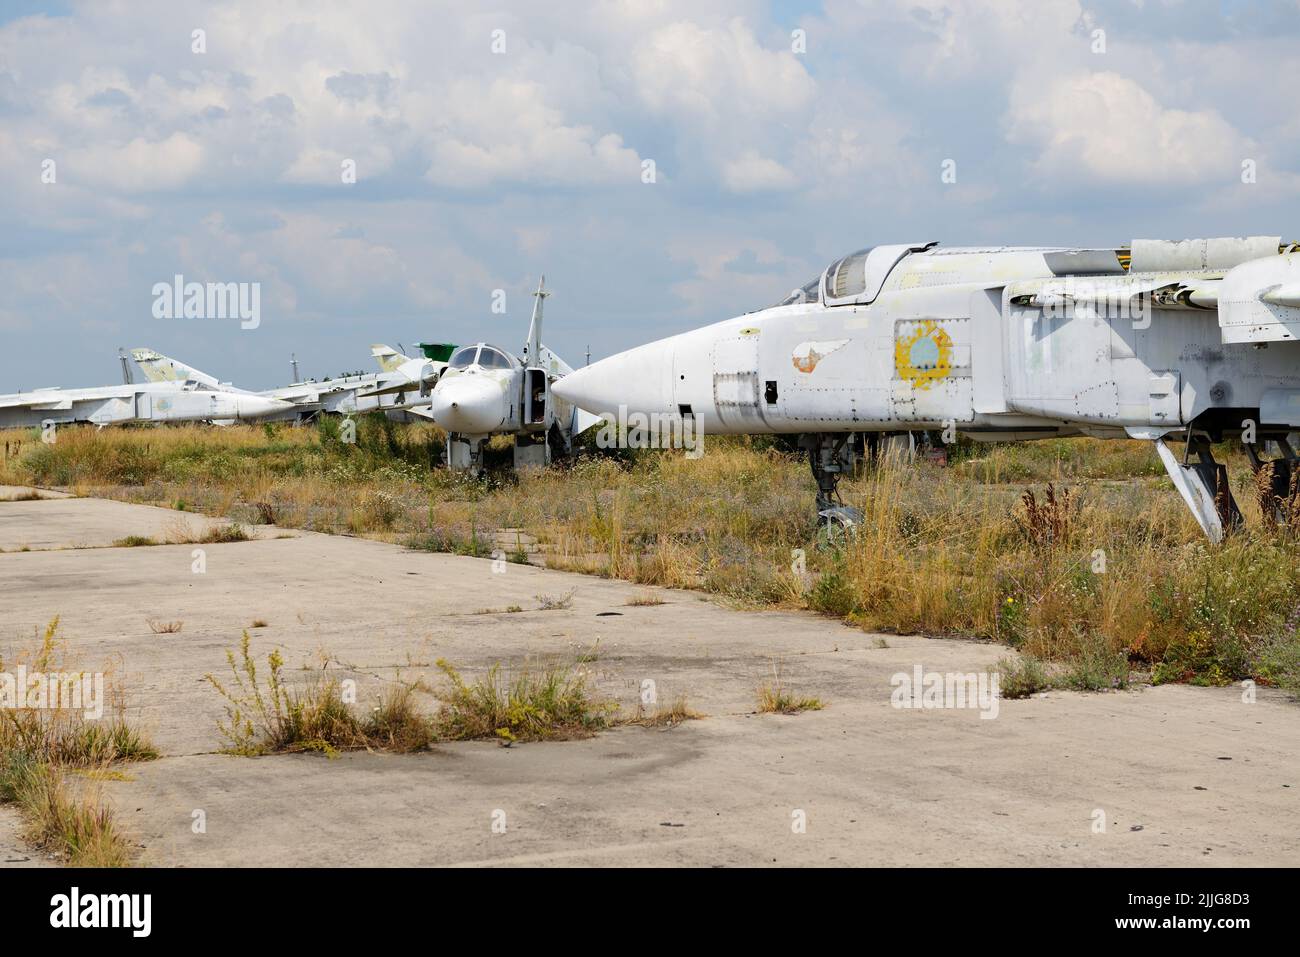 BILA TSERKVA, UKRAINE - AUGUST 25: The view on disassembled Ukrainian Sukhoi Su-24 supersonic all-weather attack aircraft on August 25, 2021 in Bila T Stock Photo